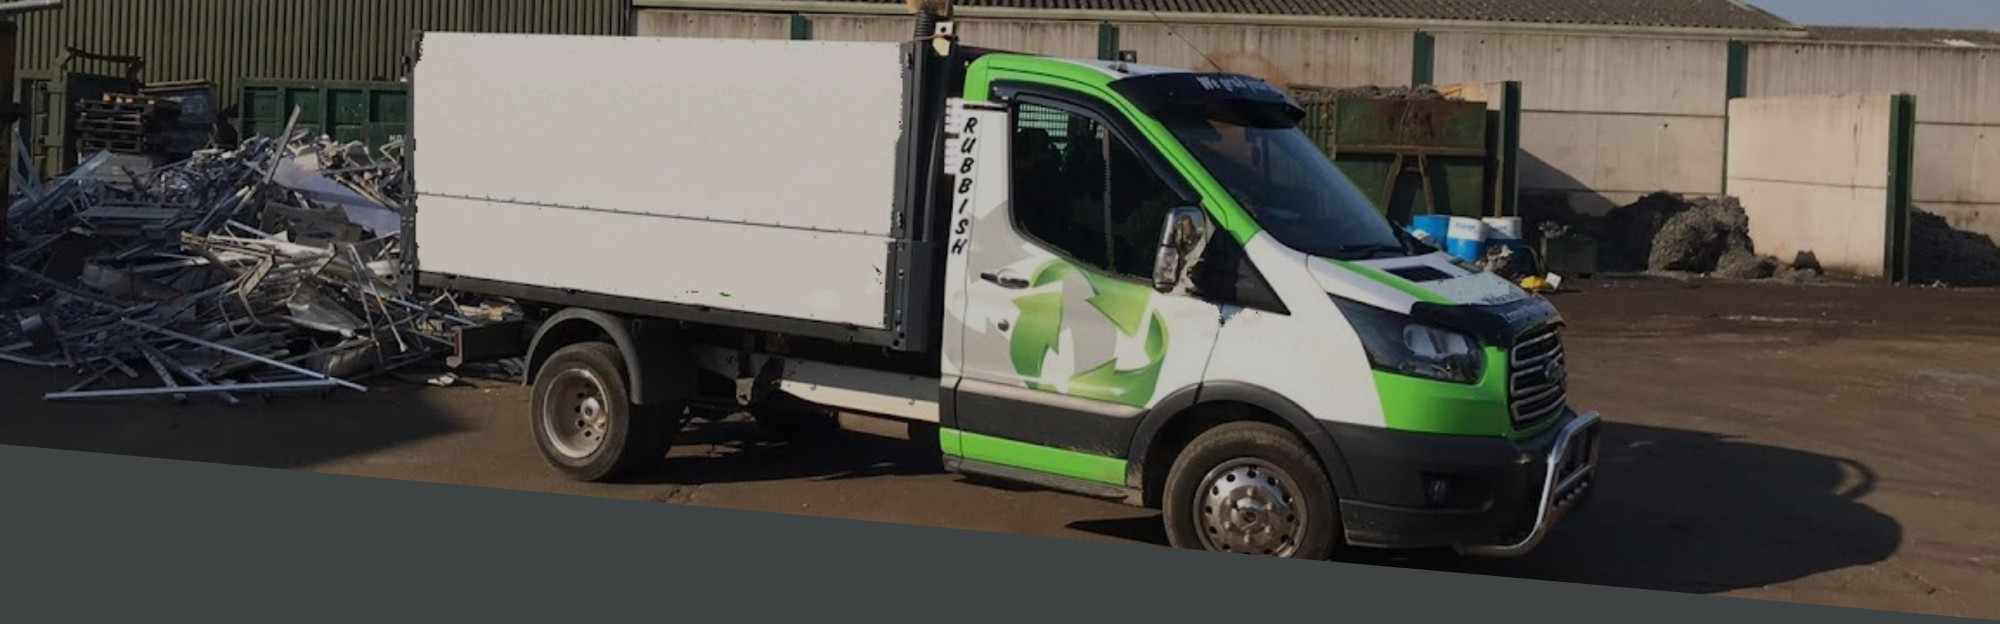 Artemes Waste Solutions - Van Collections